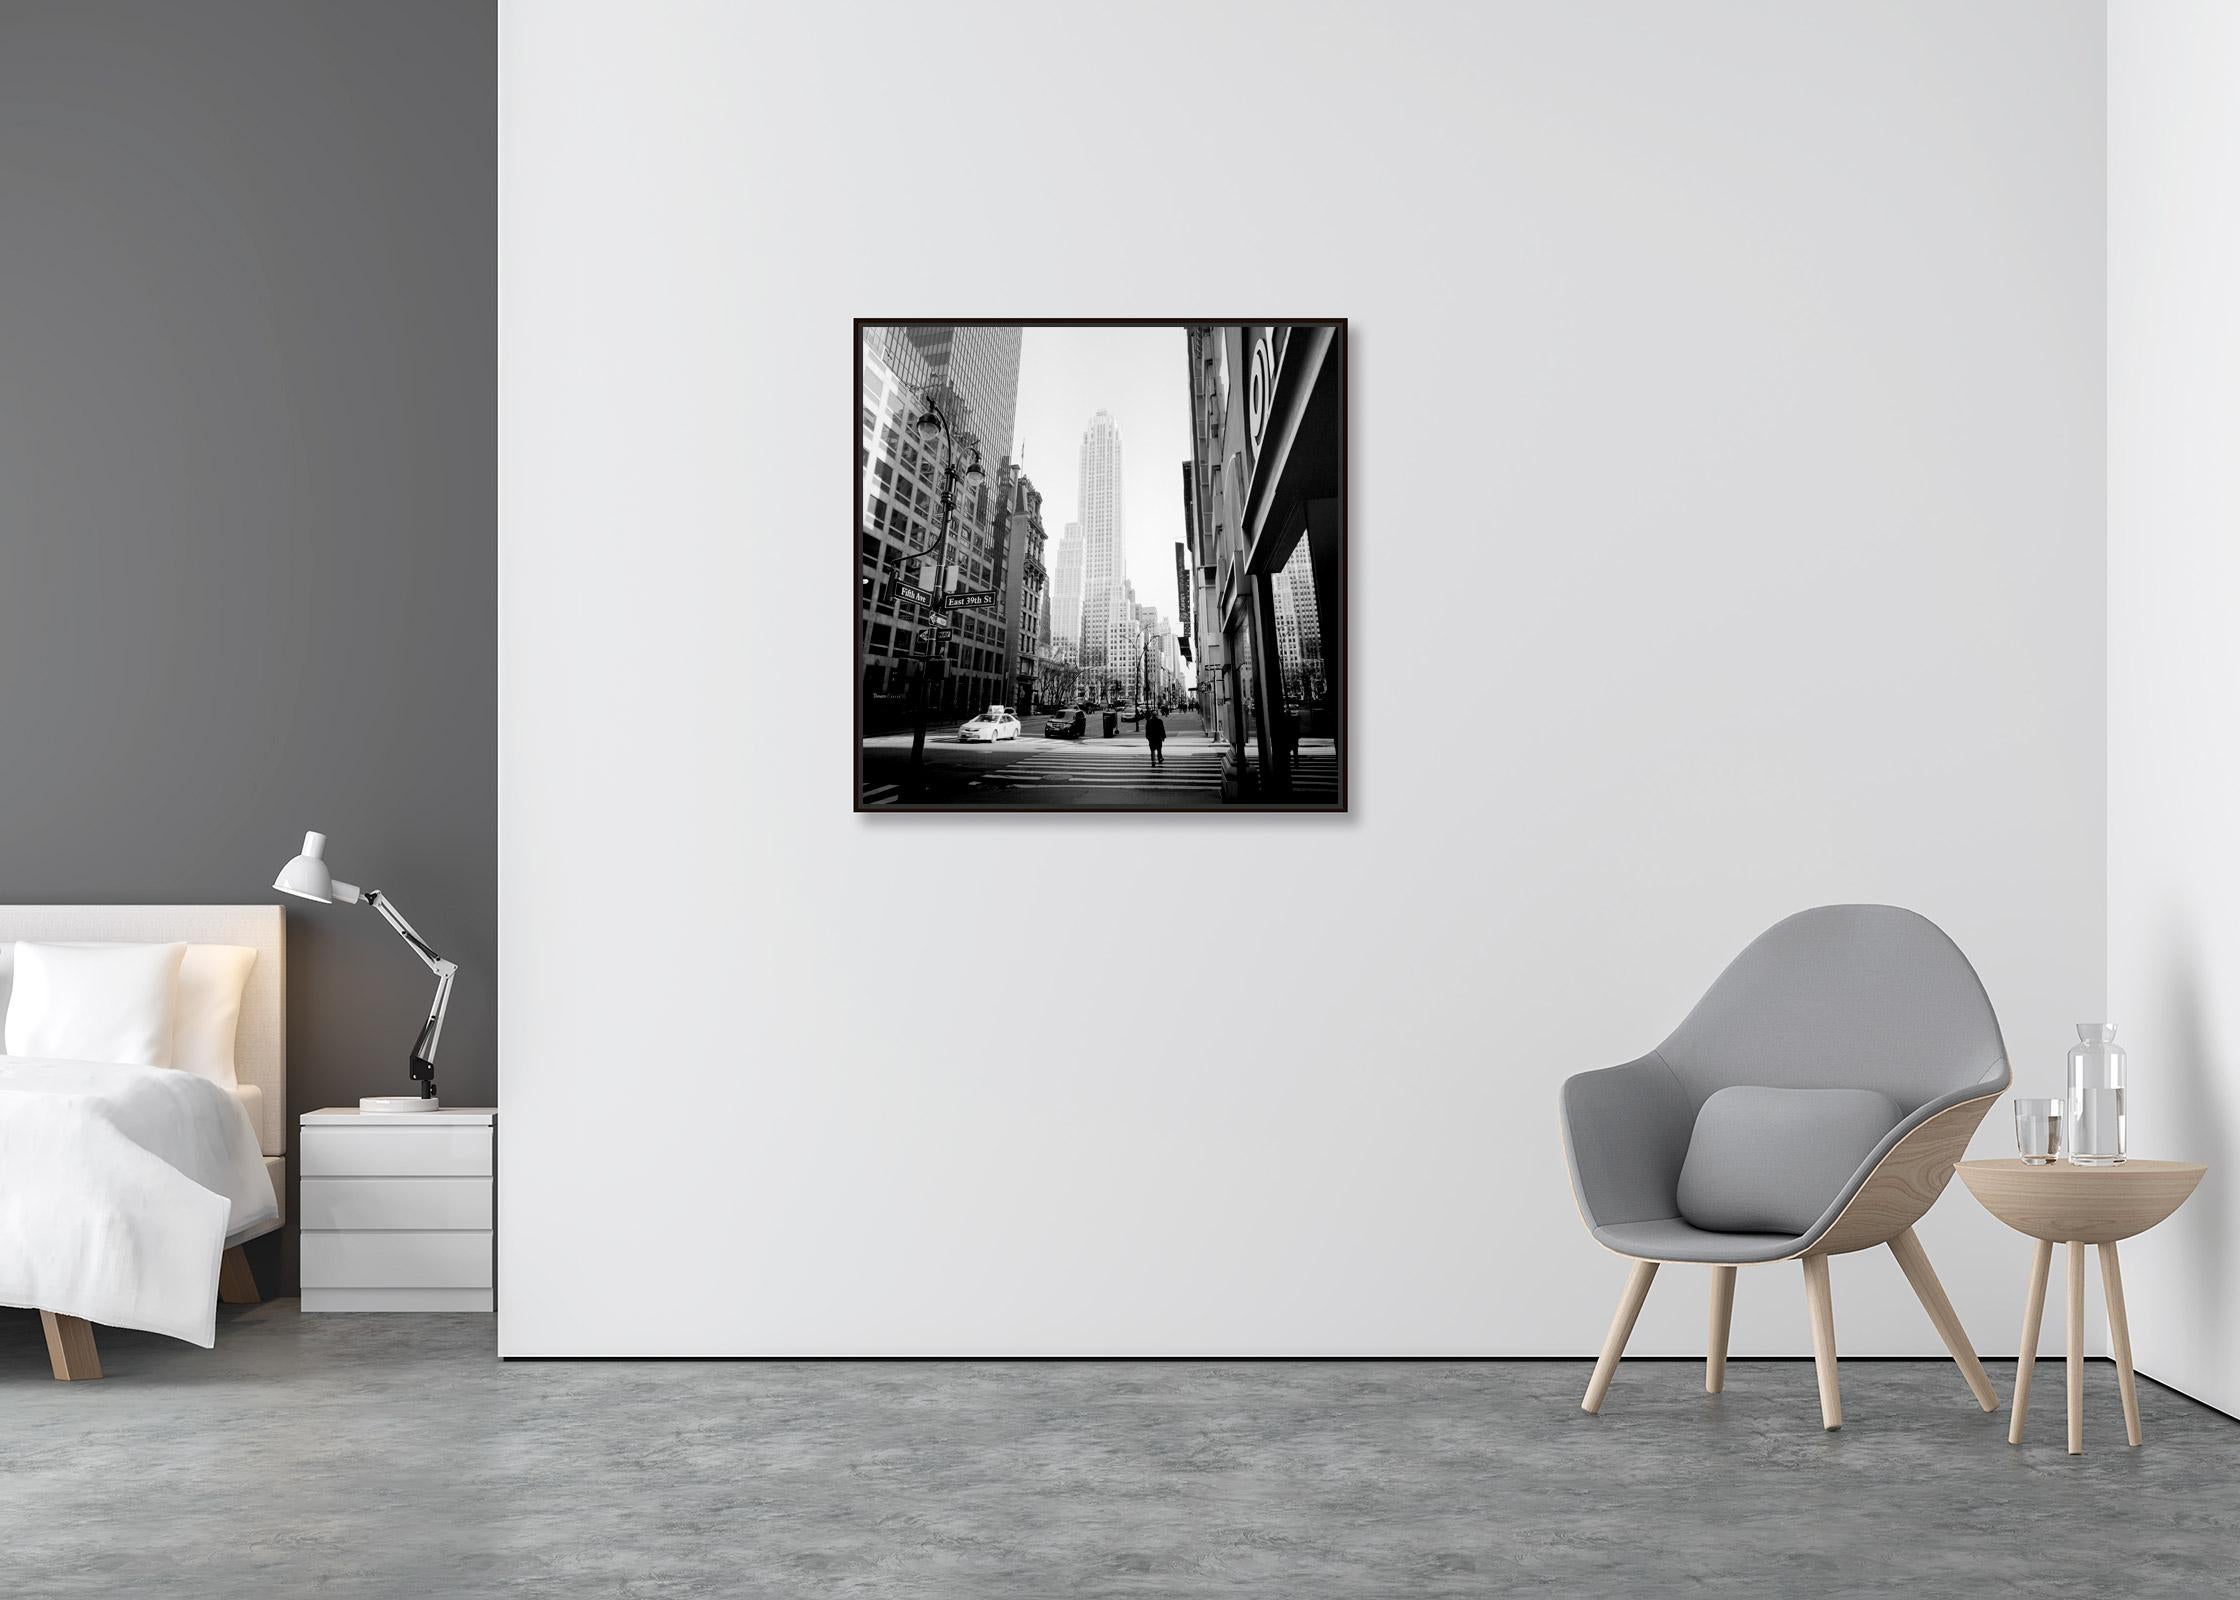 Fifth Ave East 39th St New York City USA black white art cityscape photography - Contemporary Photograph by Gerald Berghammer